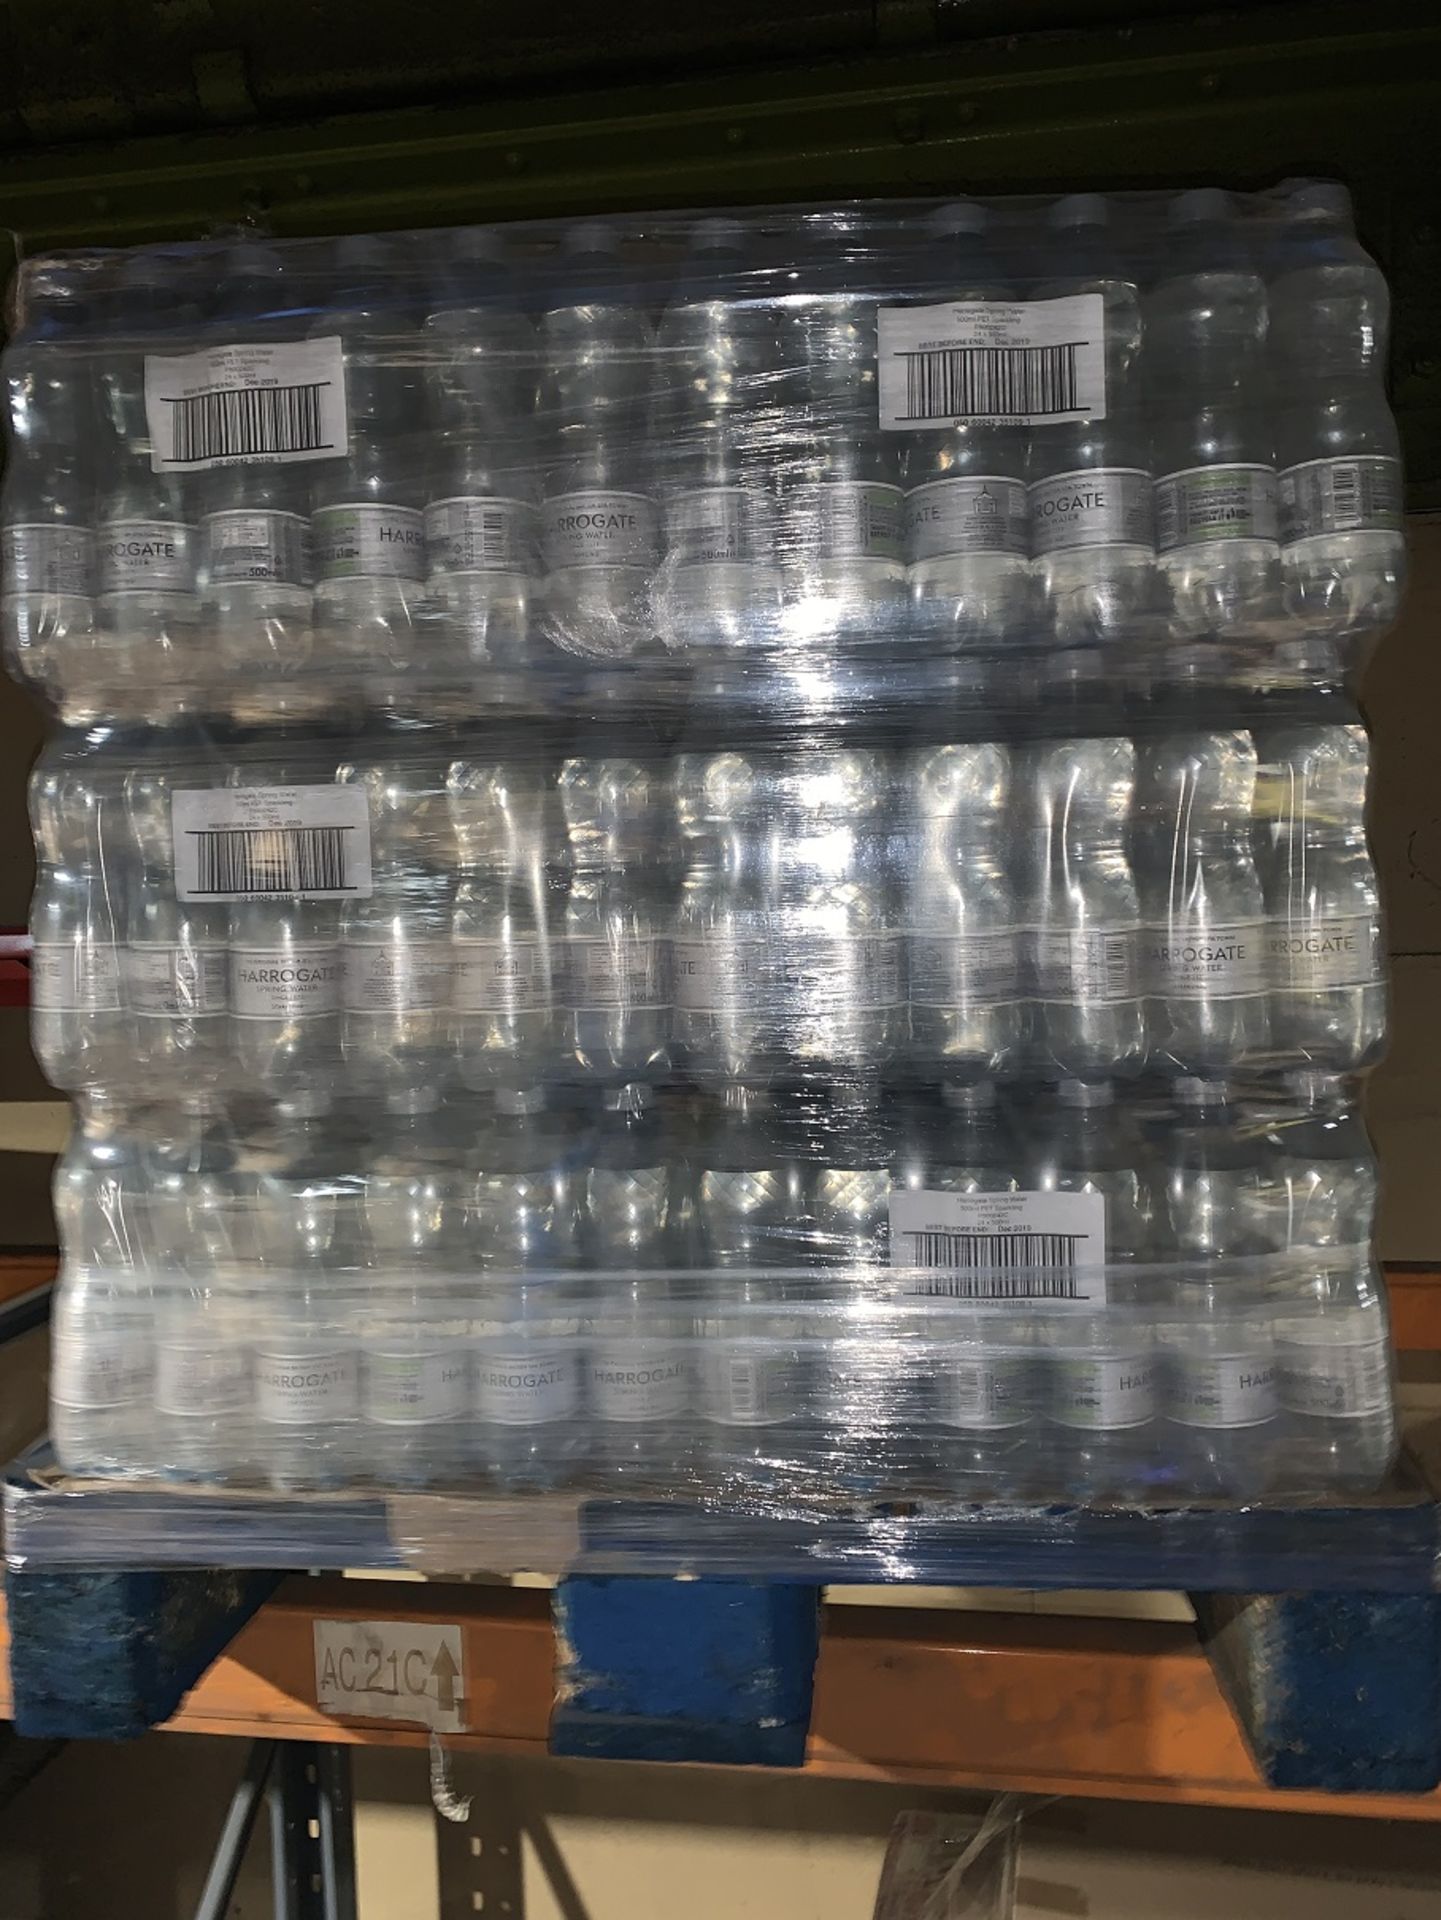 1 LOT TO CONTAIN 720 (APPROX) BOTTTLES OF HARROGATE SPARKLING SPRING WATER - BEST BEFORE DECEMBER